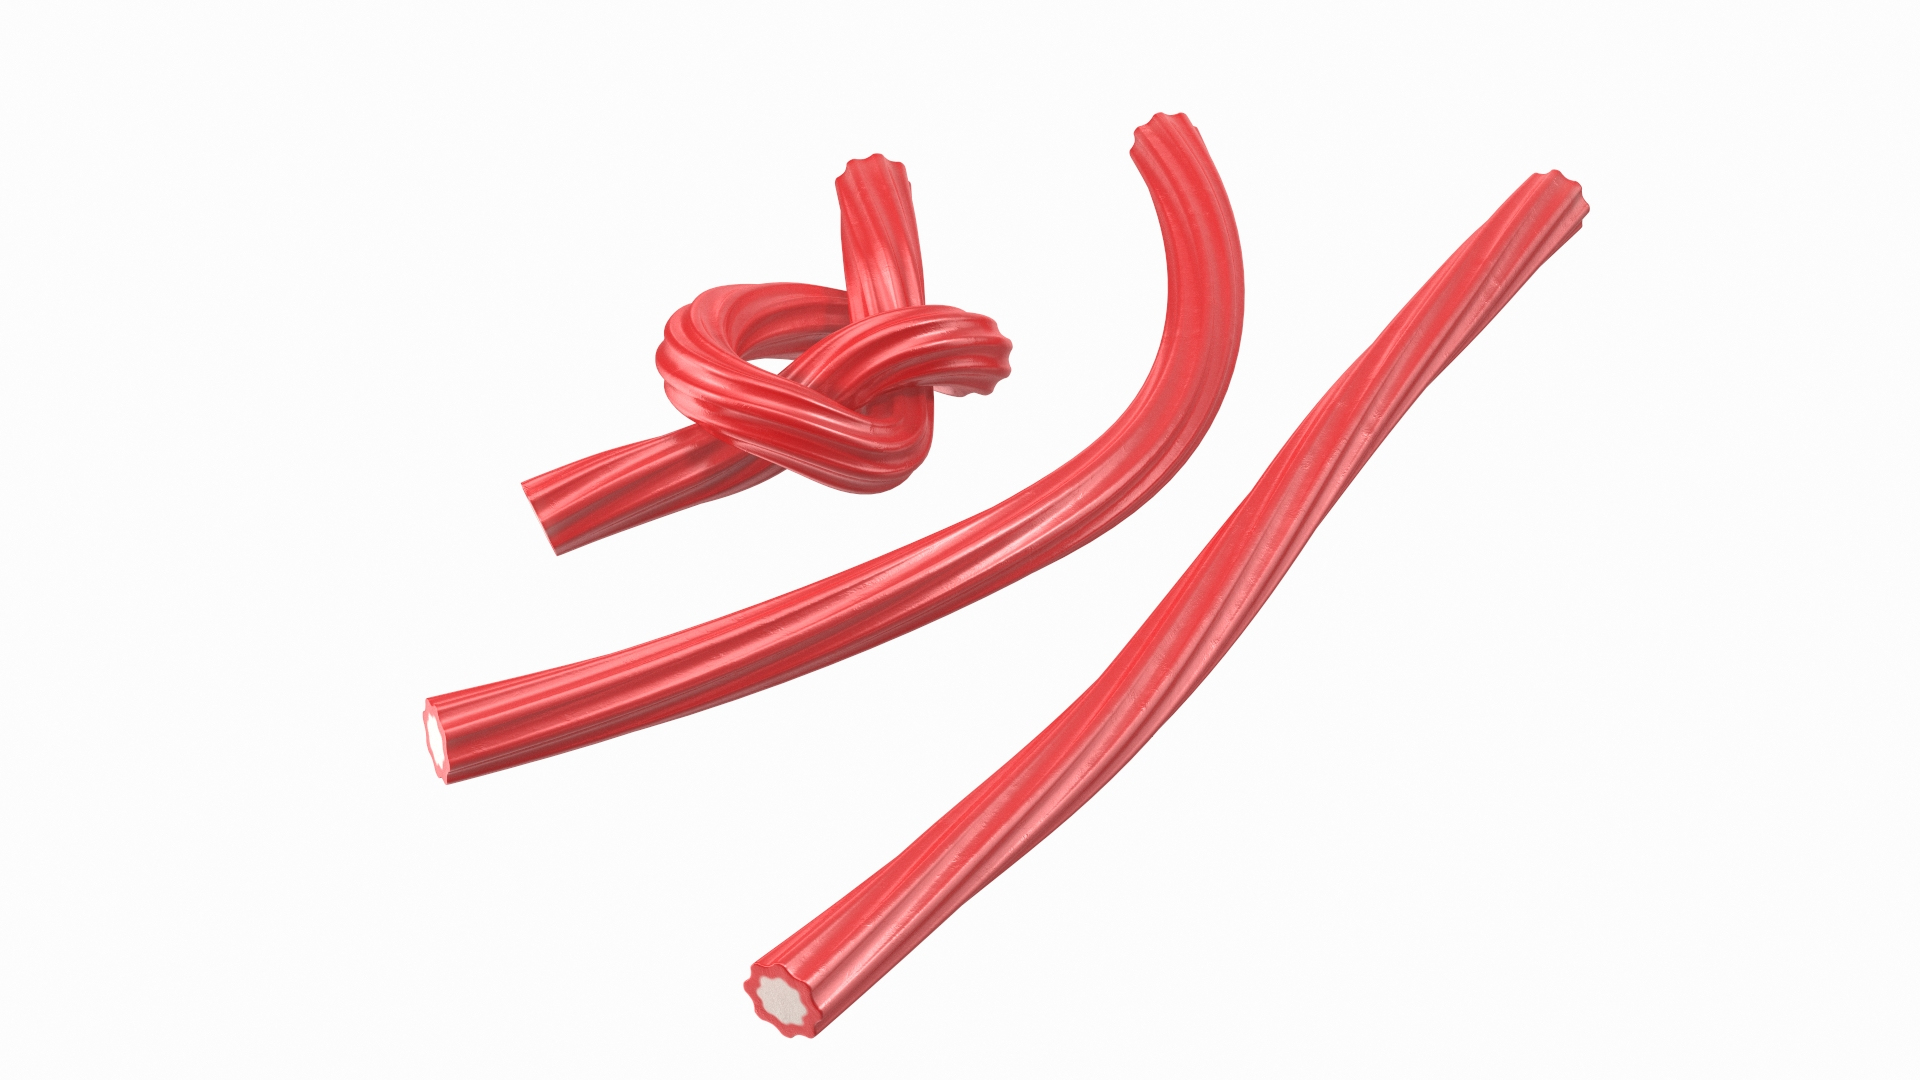 Red Gummy Candies Licorice Twisted Rope Set 3D Model - TurboSquid 1734552